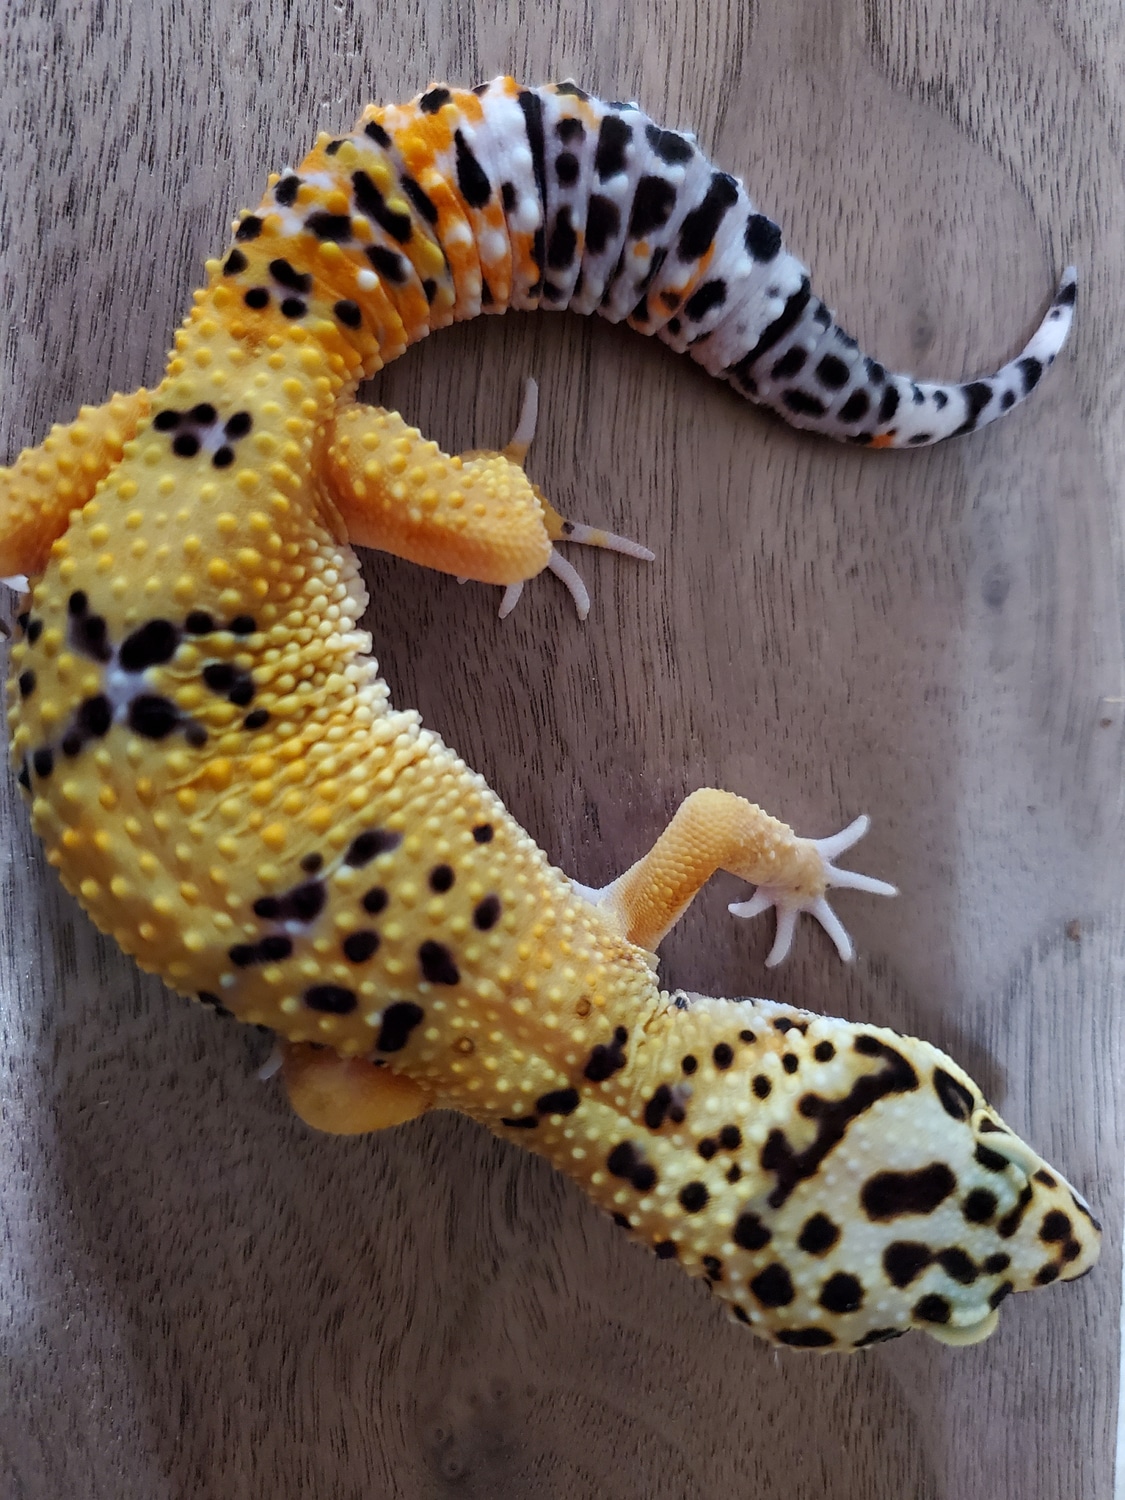 Pacific Green Tango Crush Leopard Gecko by Old World Creature's